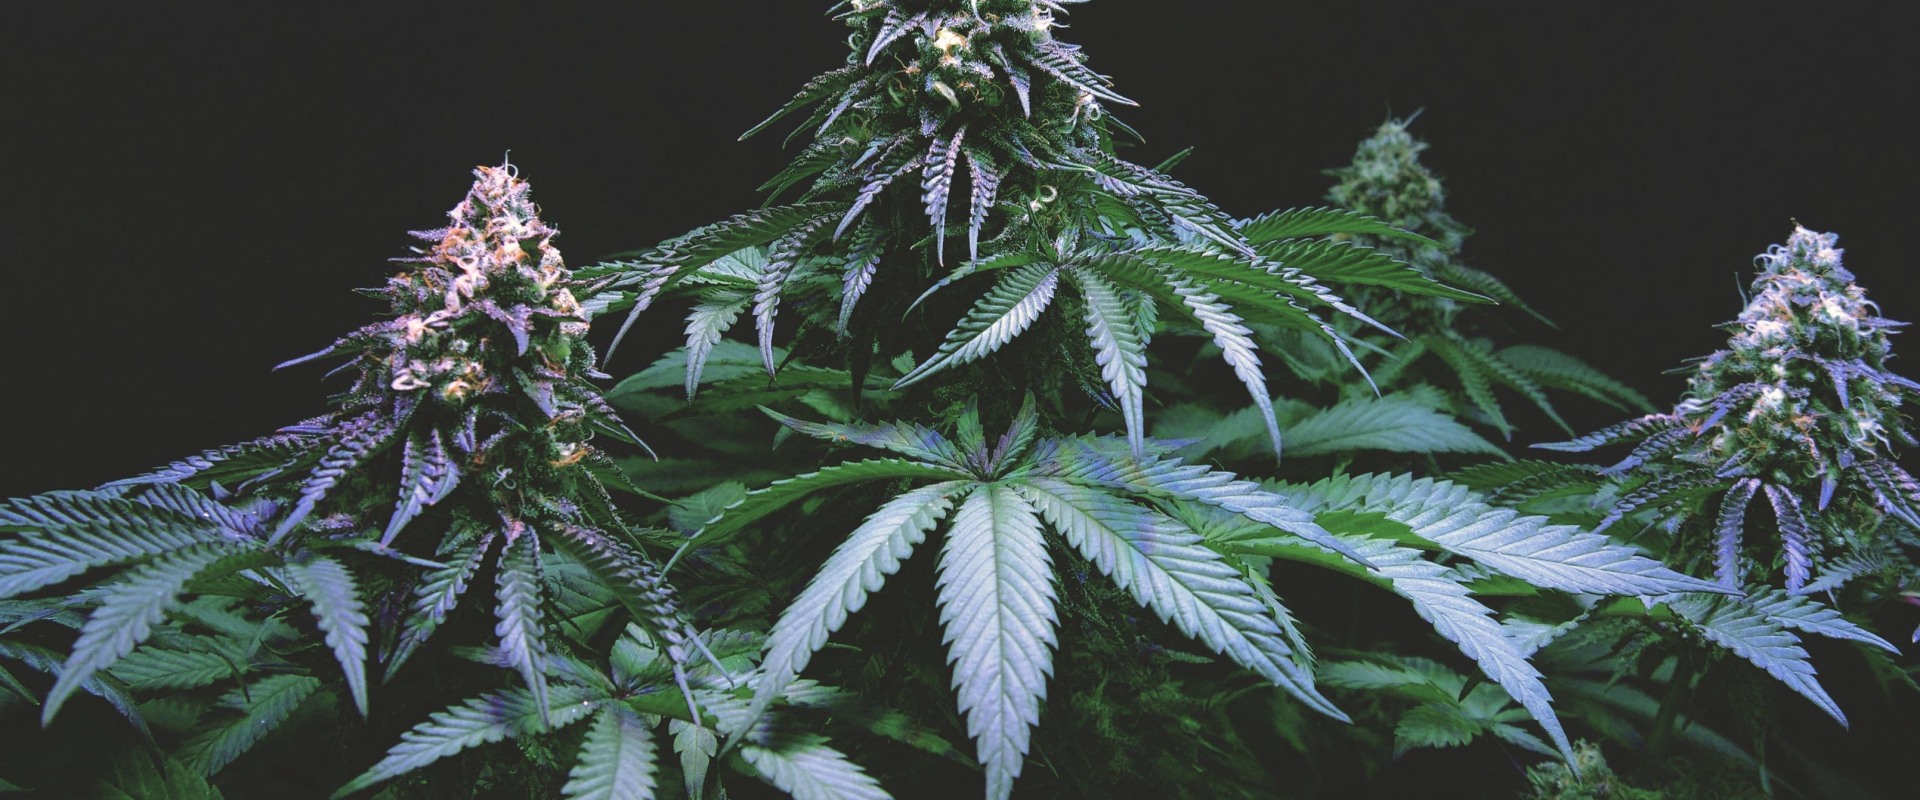 How to Maximize THC Levels in Cannabis Plants